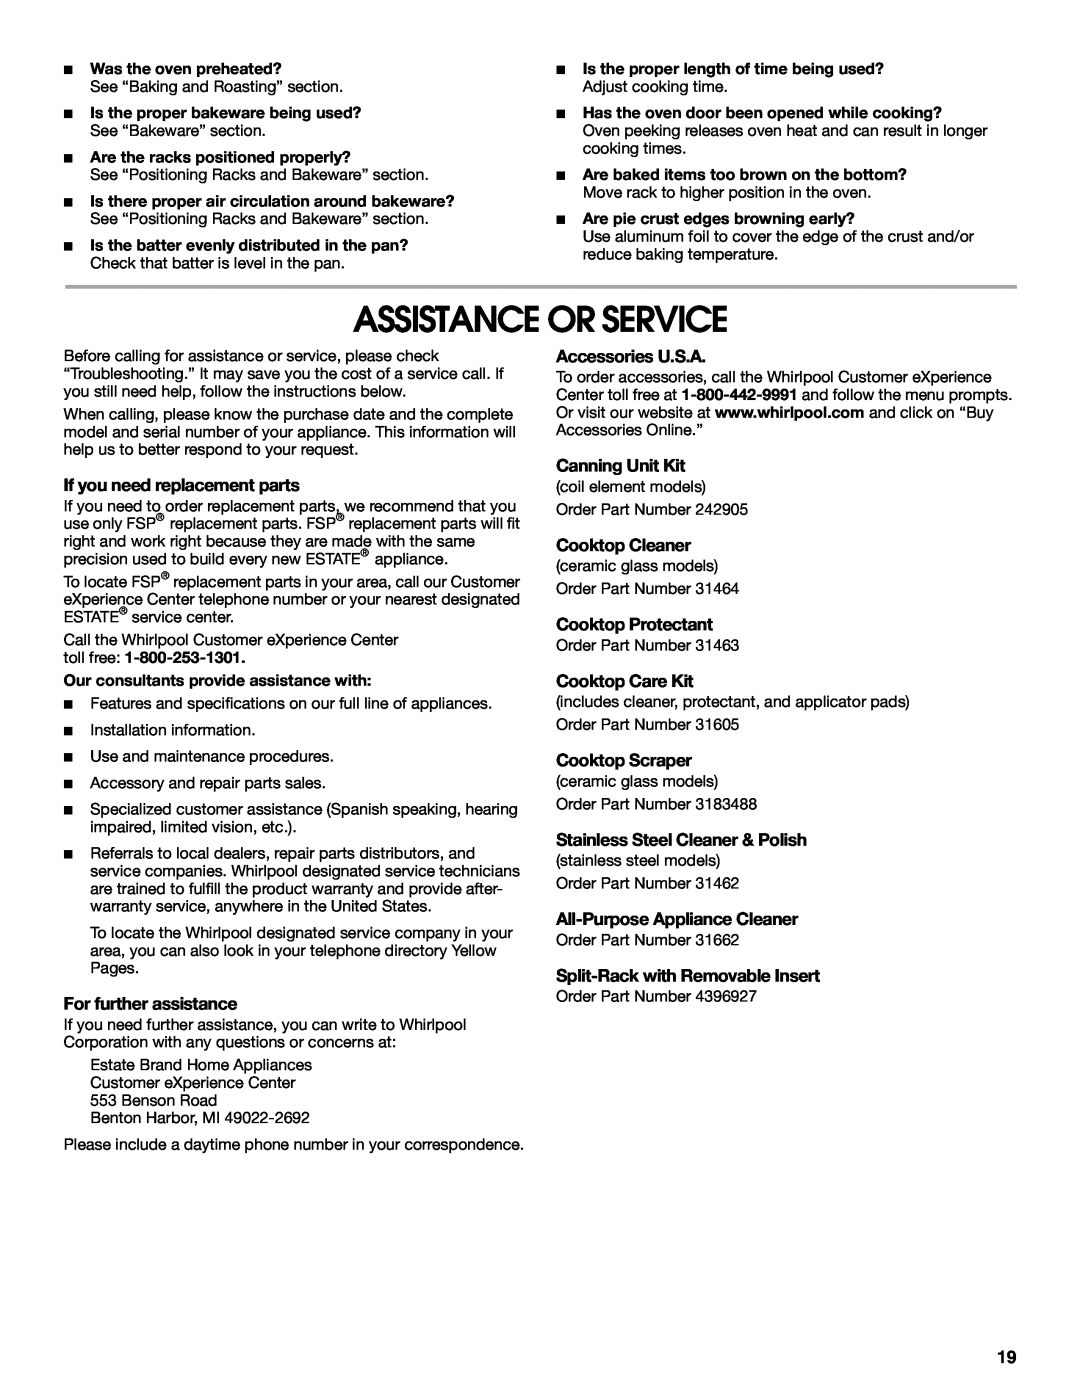 Whirlpool W10017720 manual Assistance Or Service, If you need replacement parts, For further assistance, Accessories U.S.A 